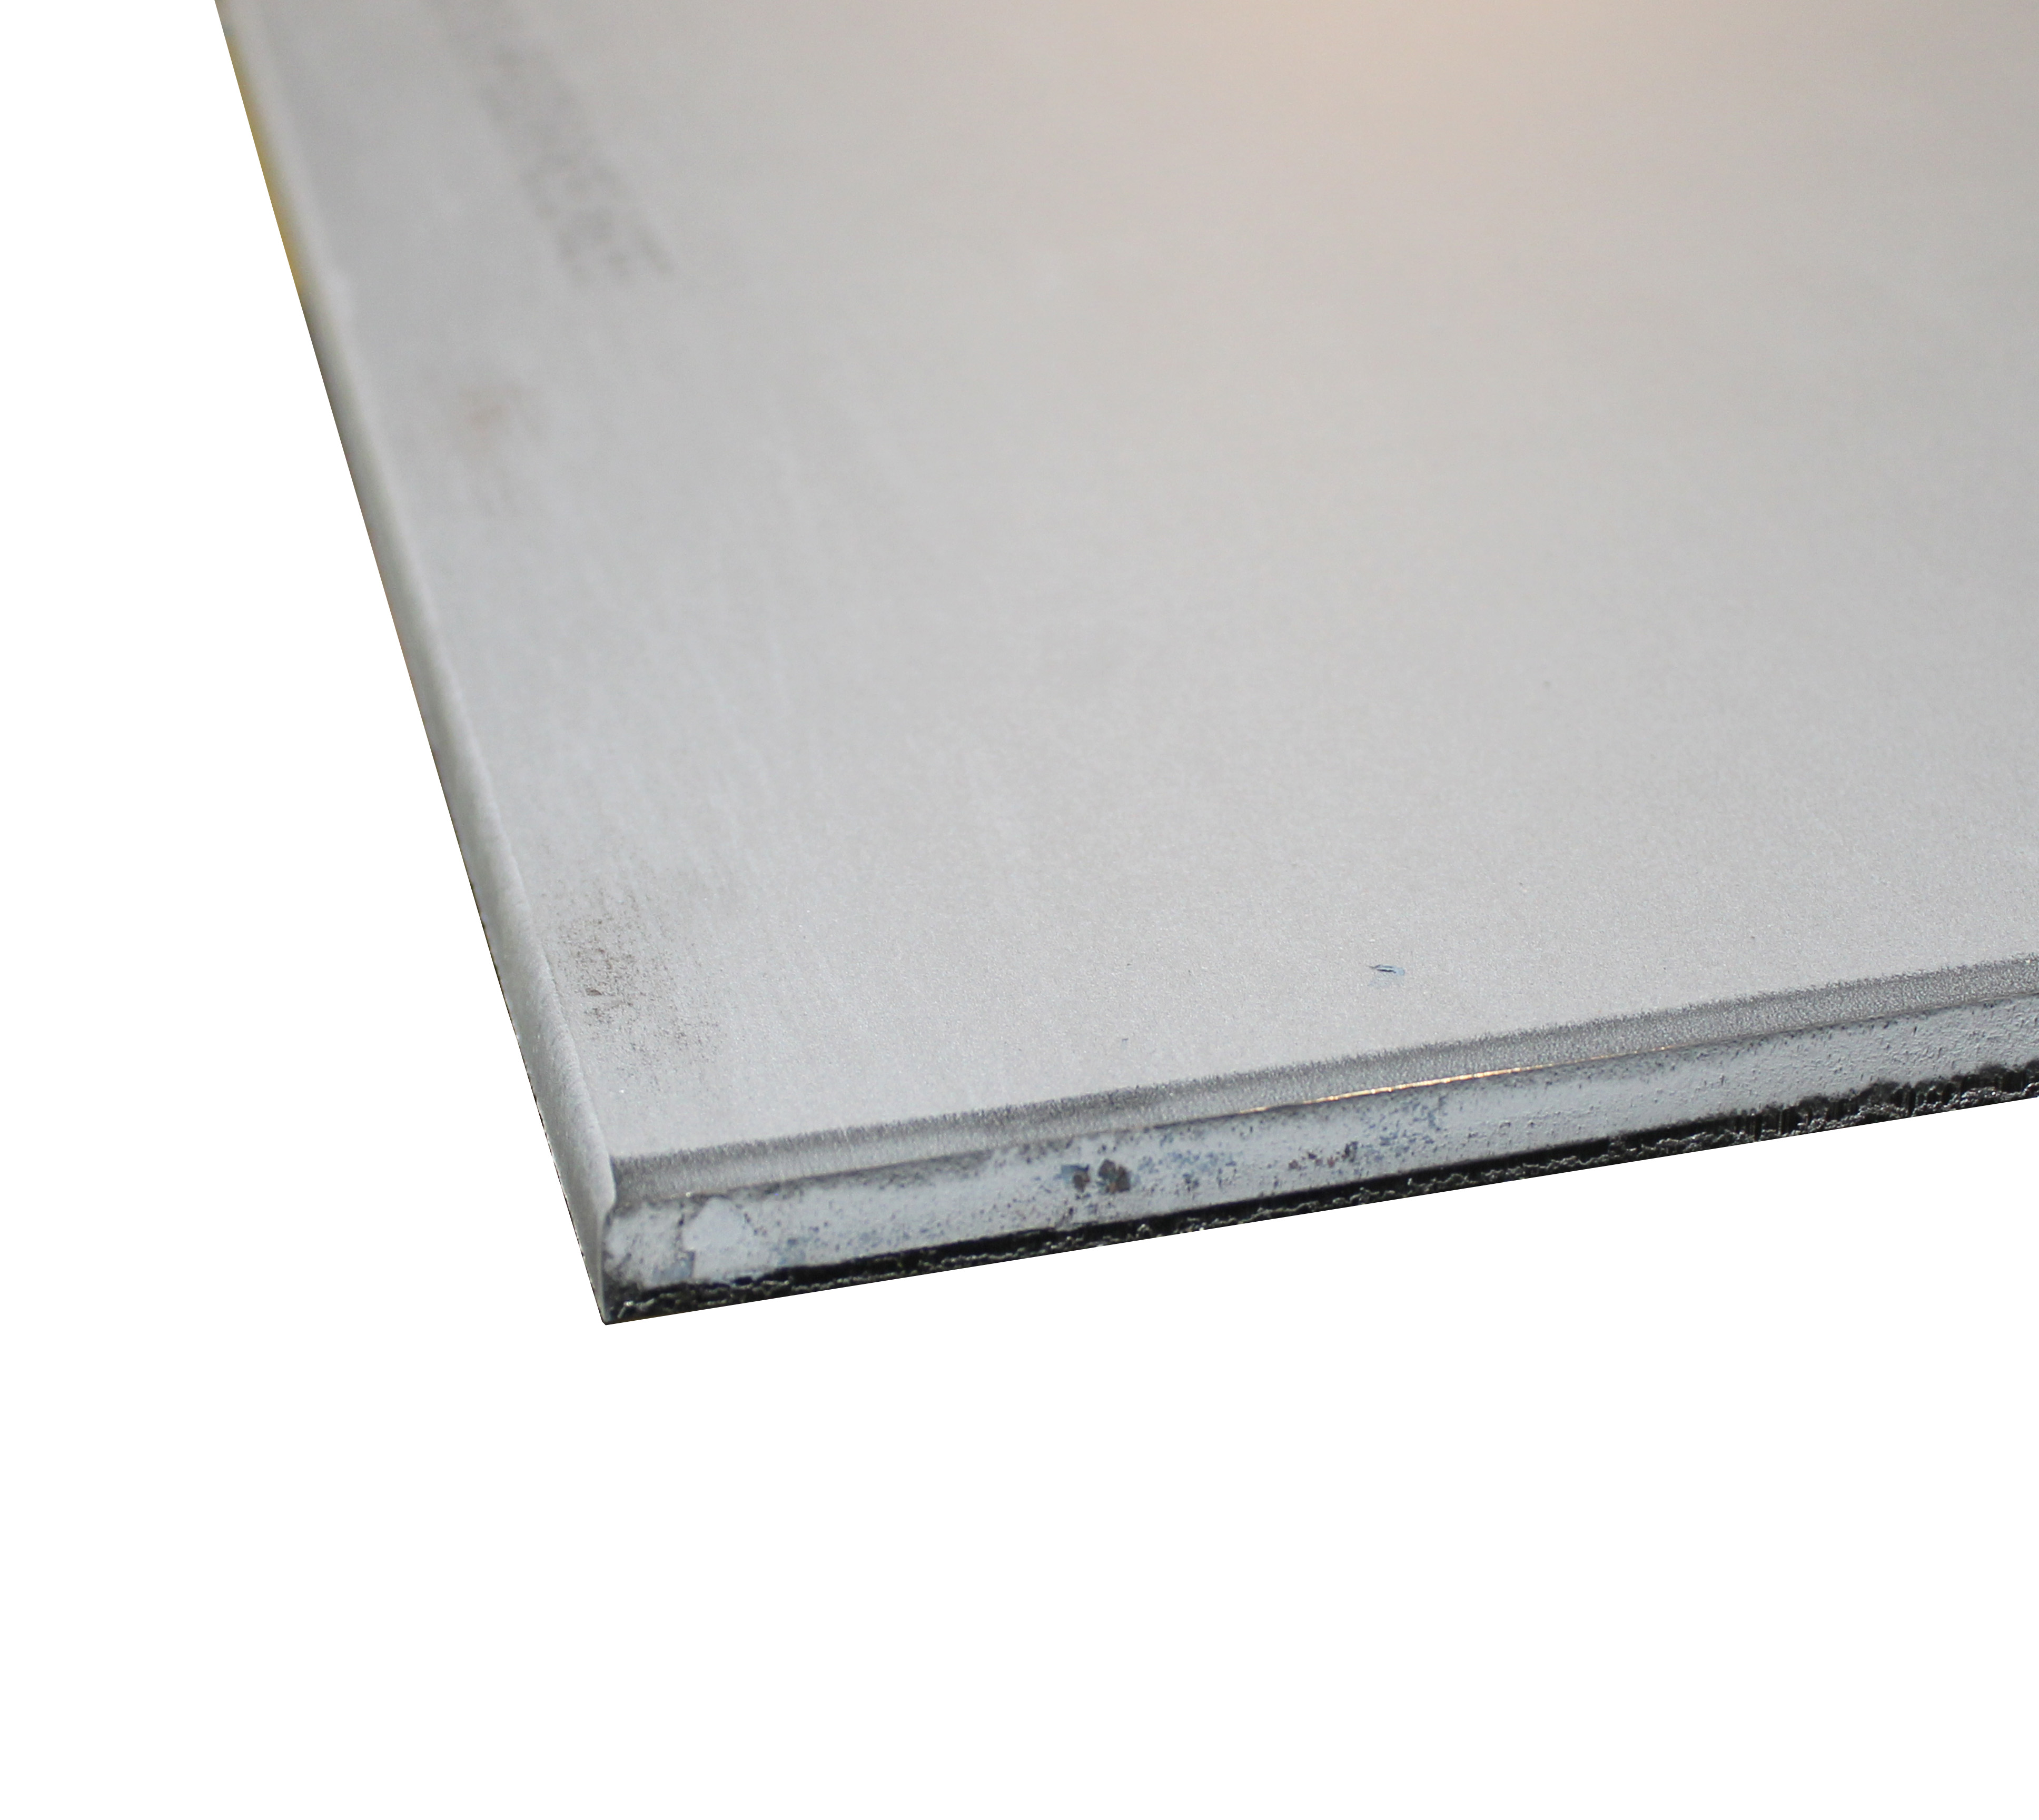 Online Metal Supply 316 Stainless Steel Plate 1//4 x 6 x 6